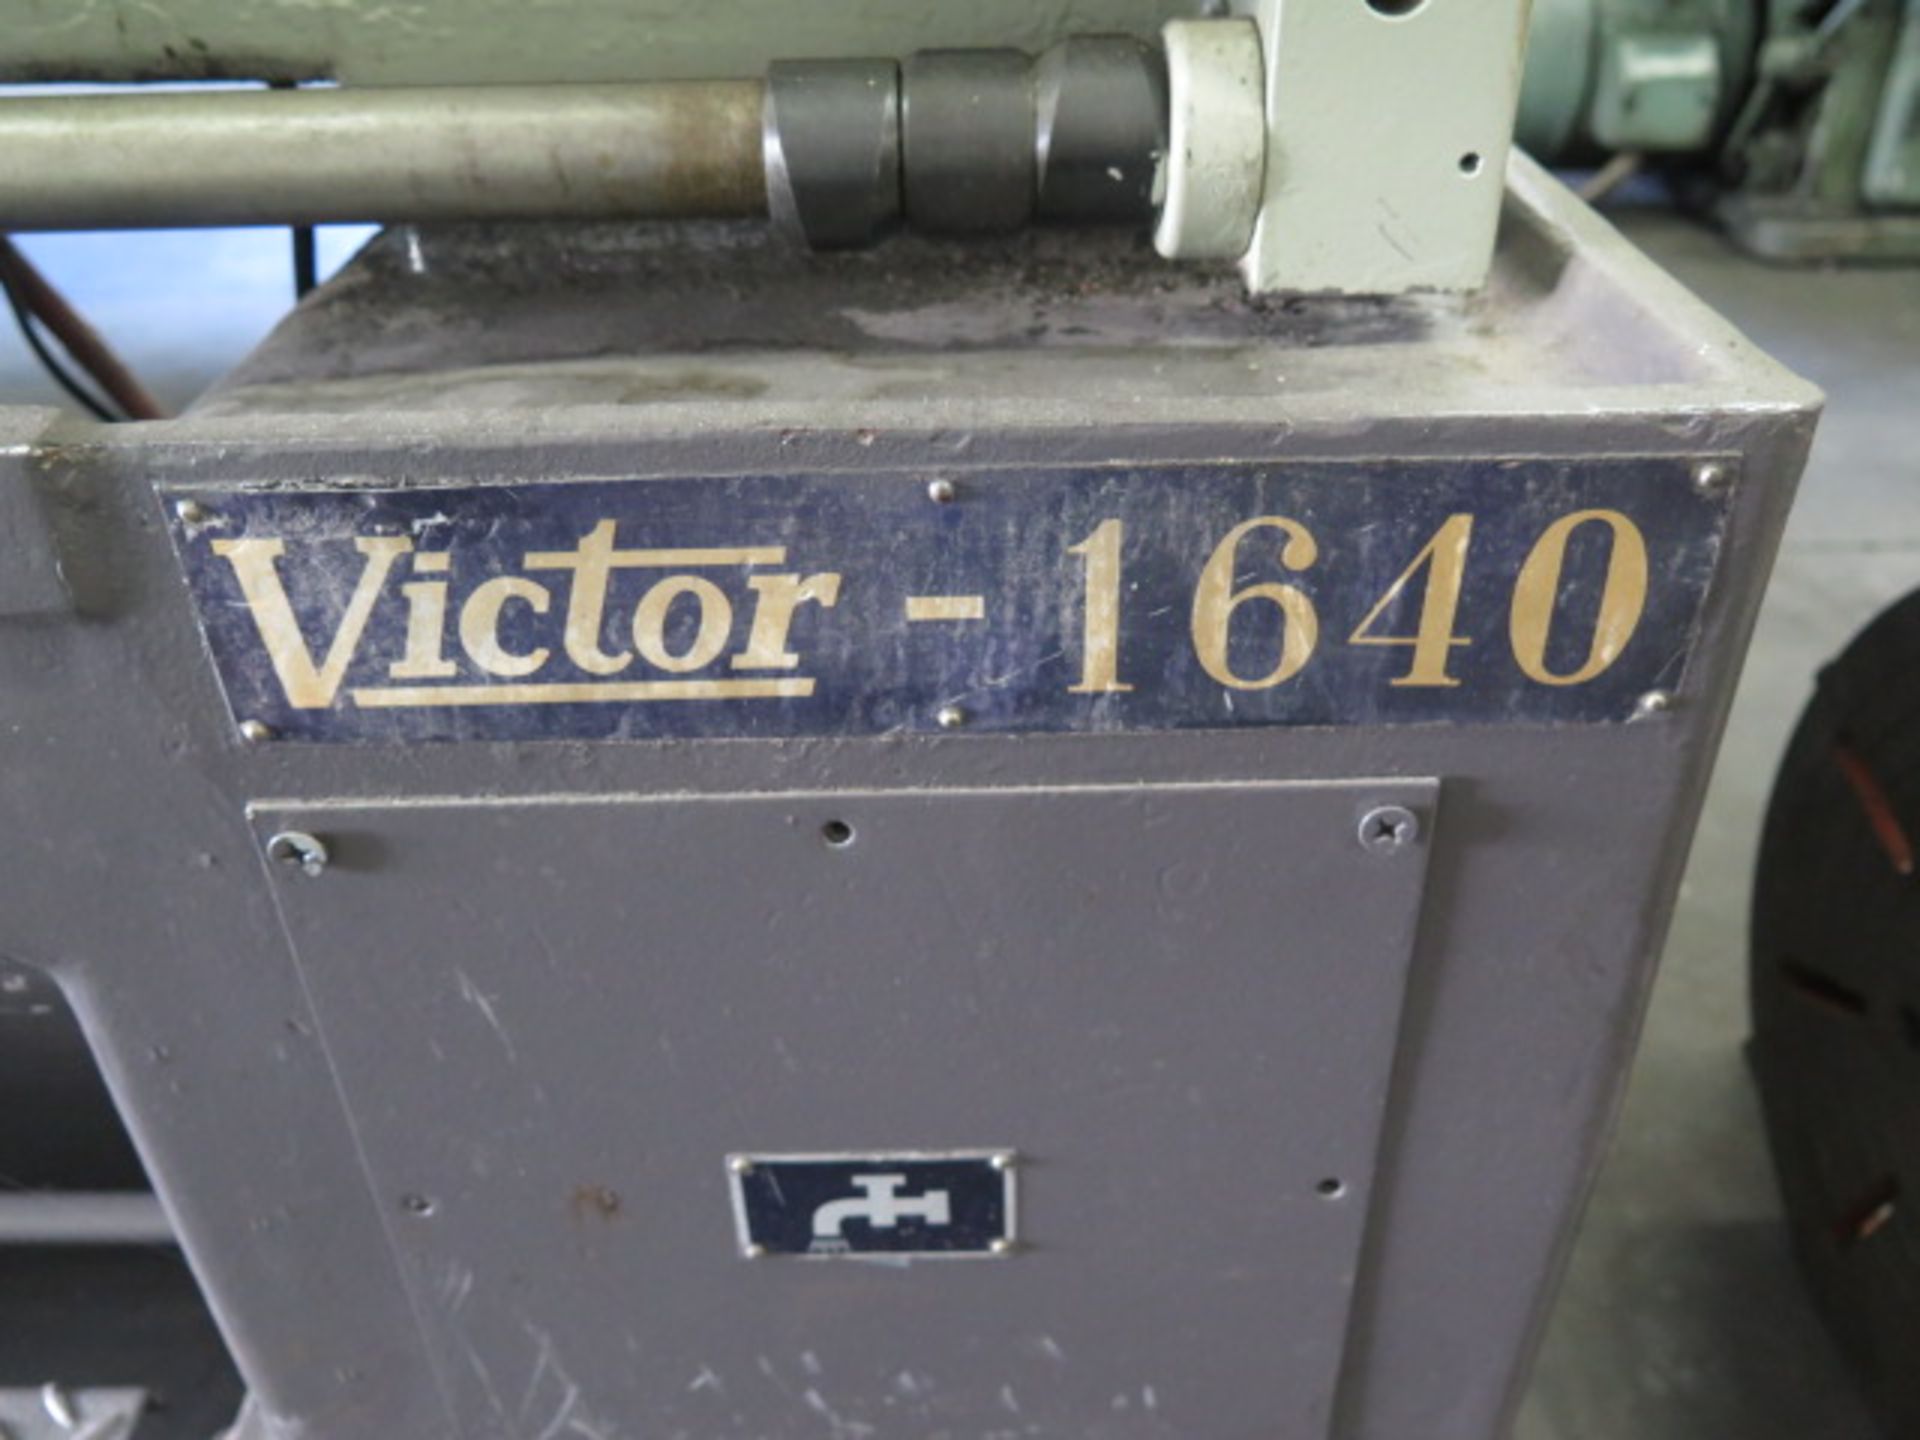 Victor 1640 16” x 40” Geared Gap Bed Lathe s/n 460583 w/ 65-1800 RPM, Taper Attachment, SOLD AS IS - Image 4 of 11